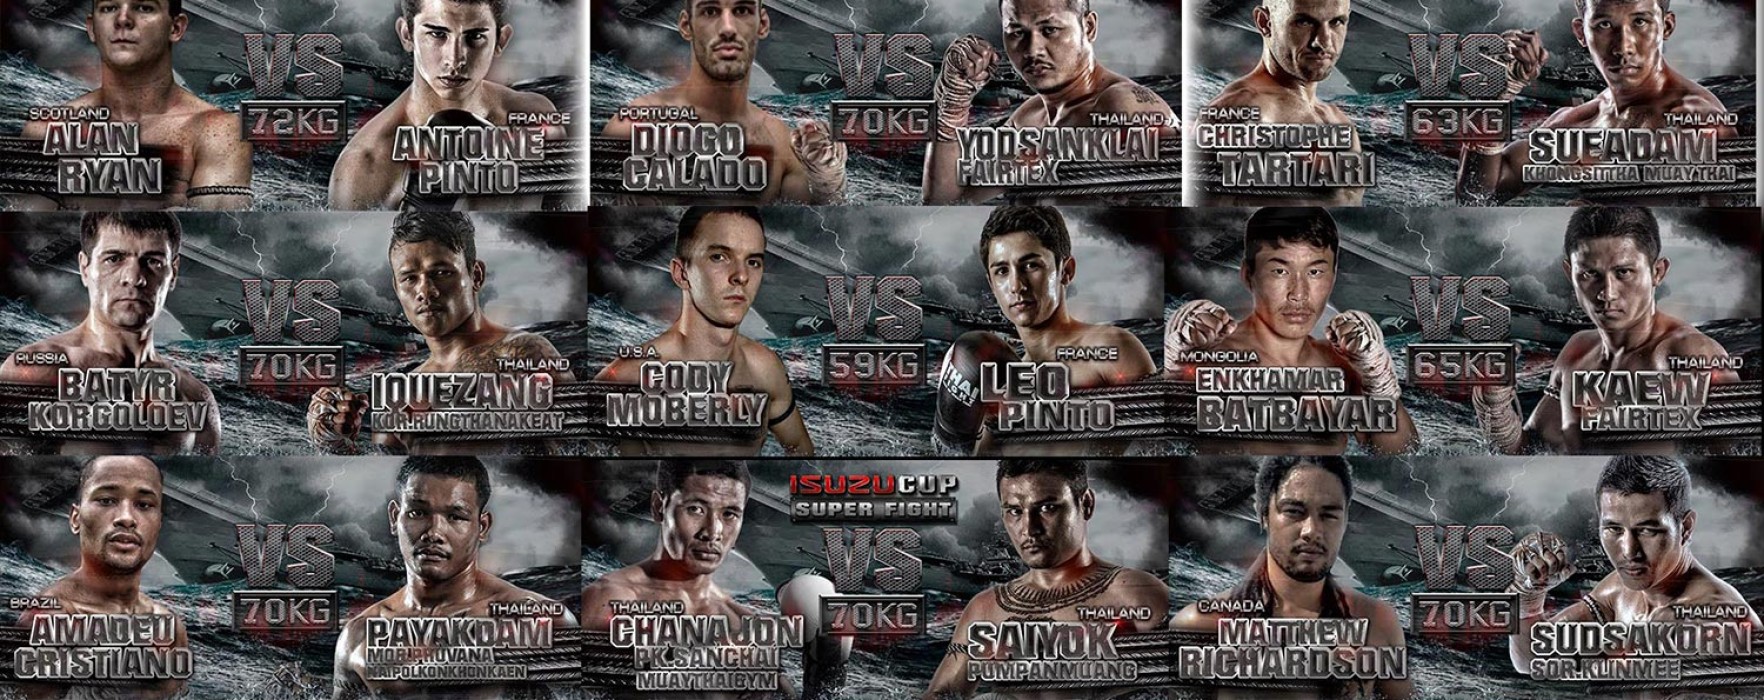 Thai Fight 6 April LIVE Results